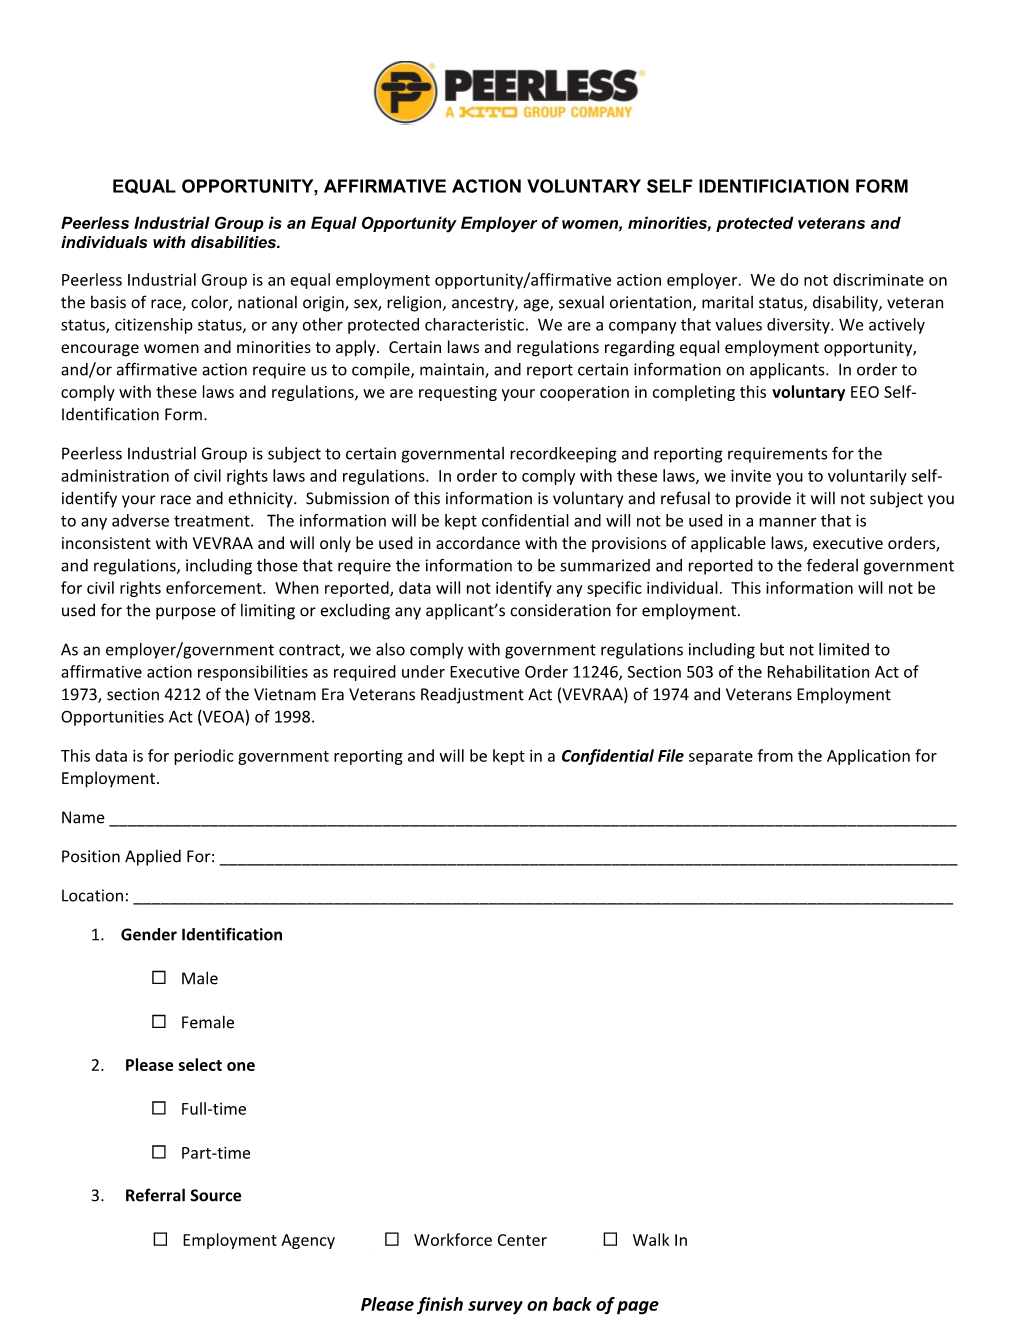 Equal Opportunity, Affirmative Action Voluntary Self Identificiation Form